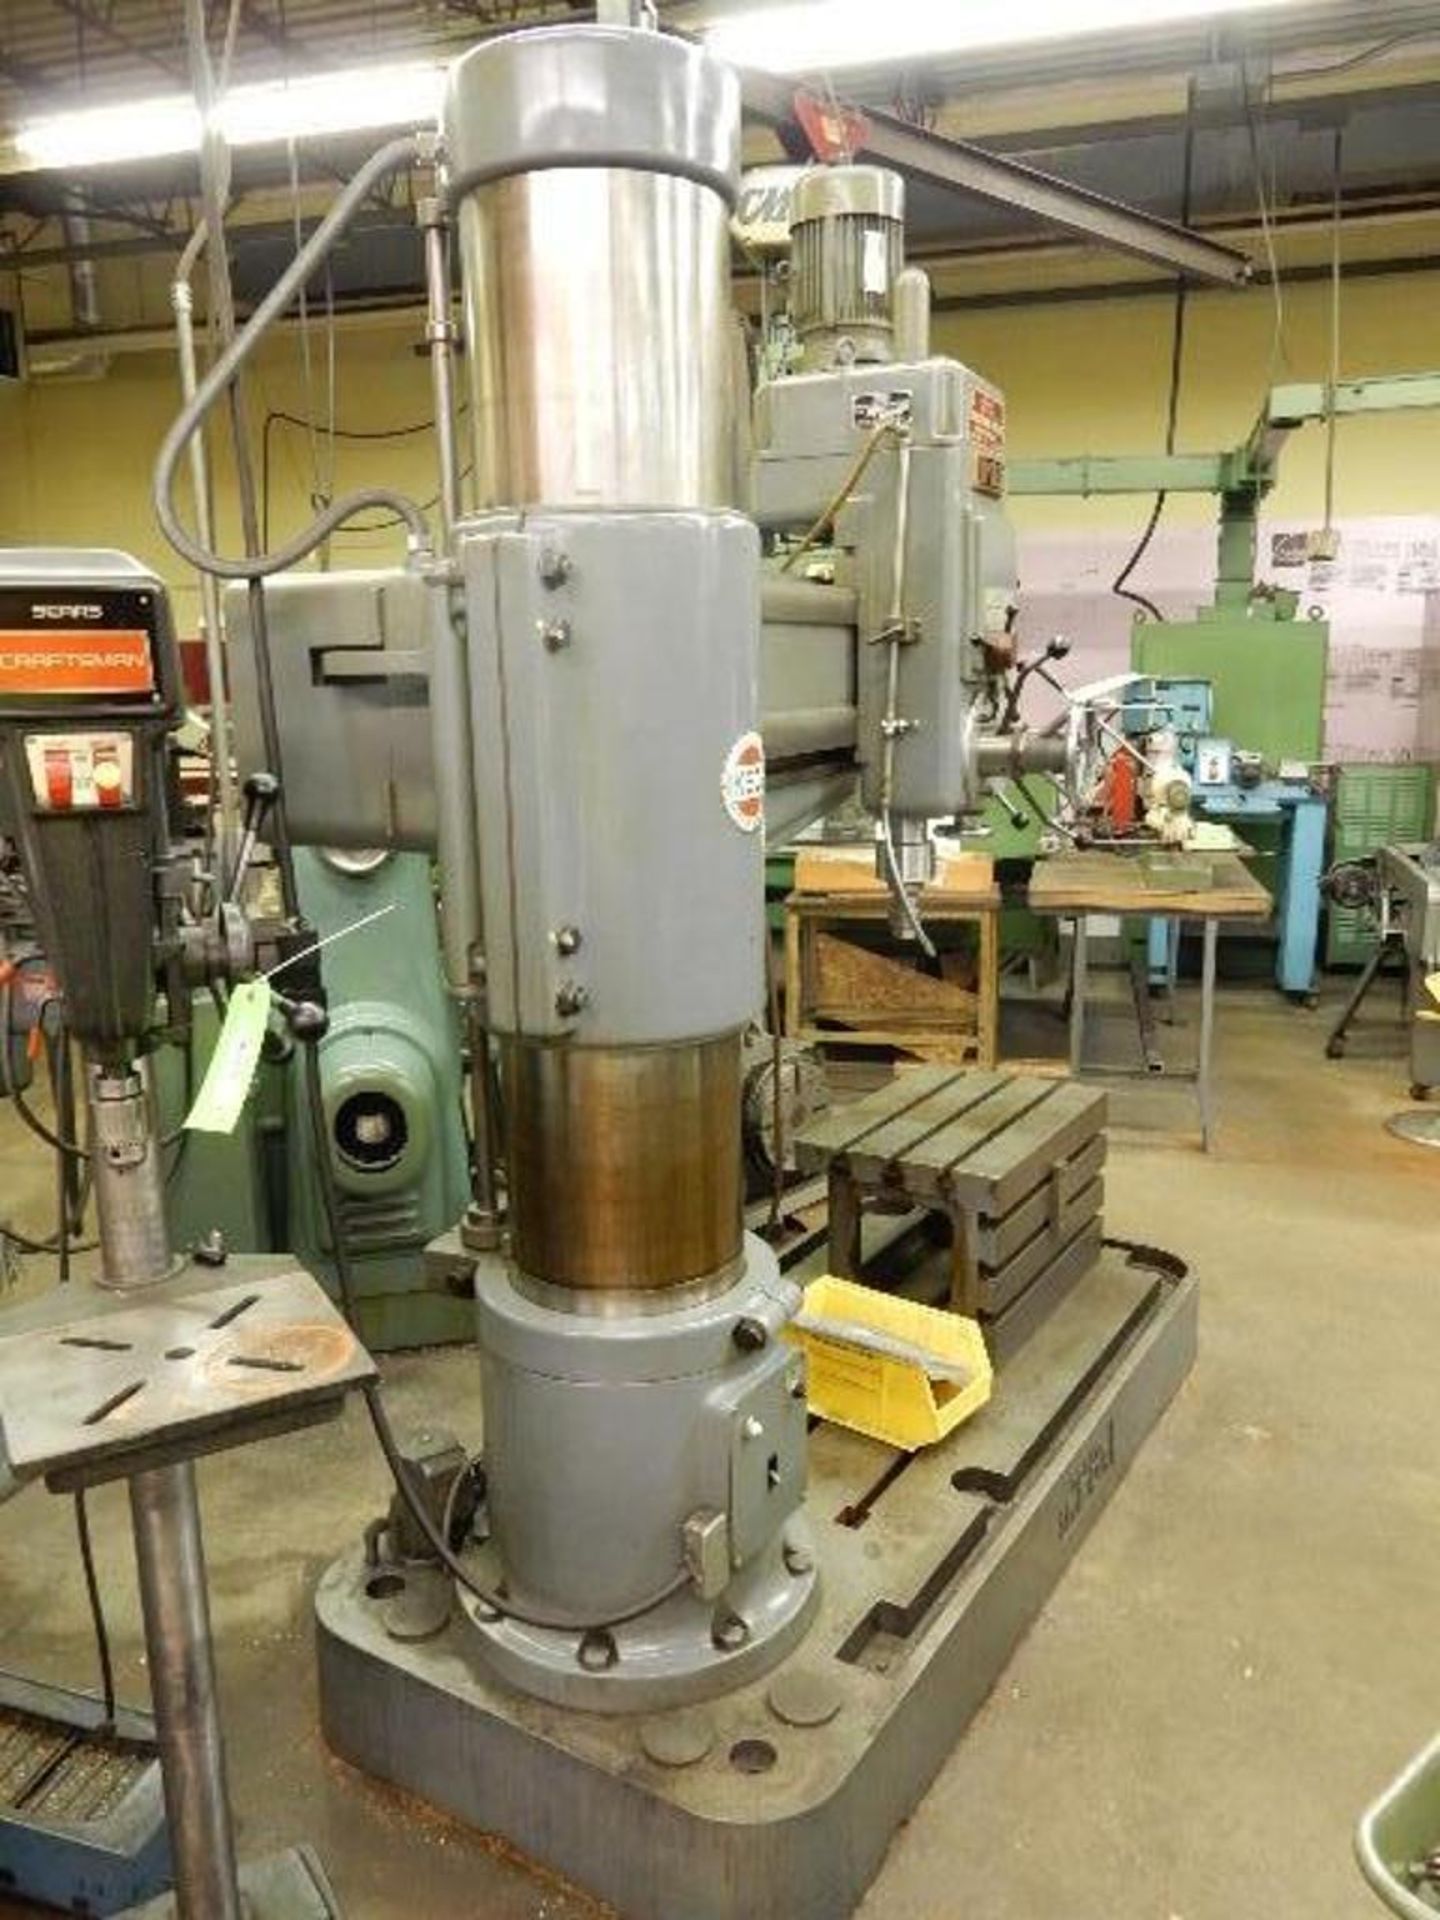 Ikeda Model RM-1375 Radial Arm Drill, 13" Column, 5' Arm, 30-1500 RPM Spindle Speeds, 26.5" - Image 16 of 27